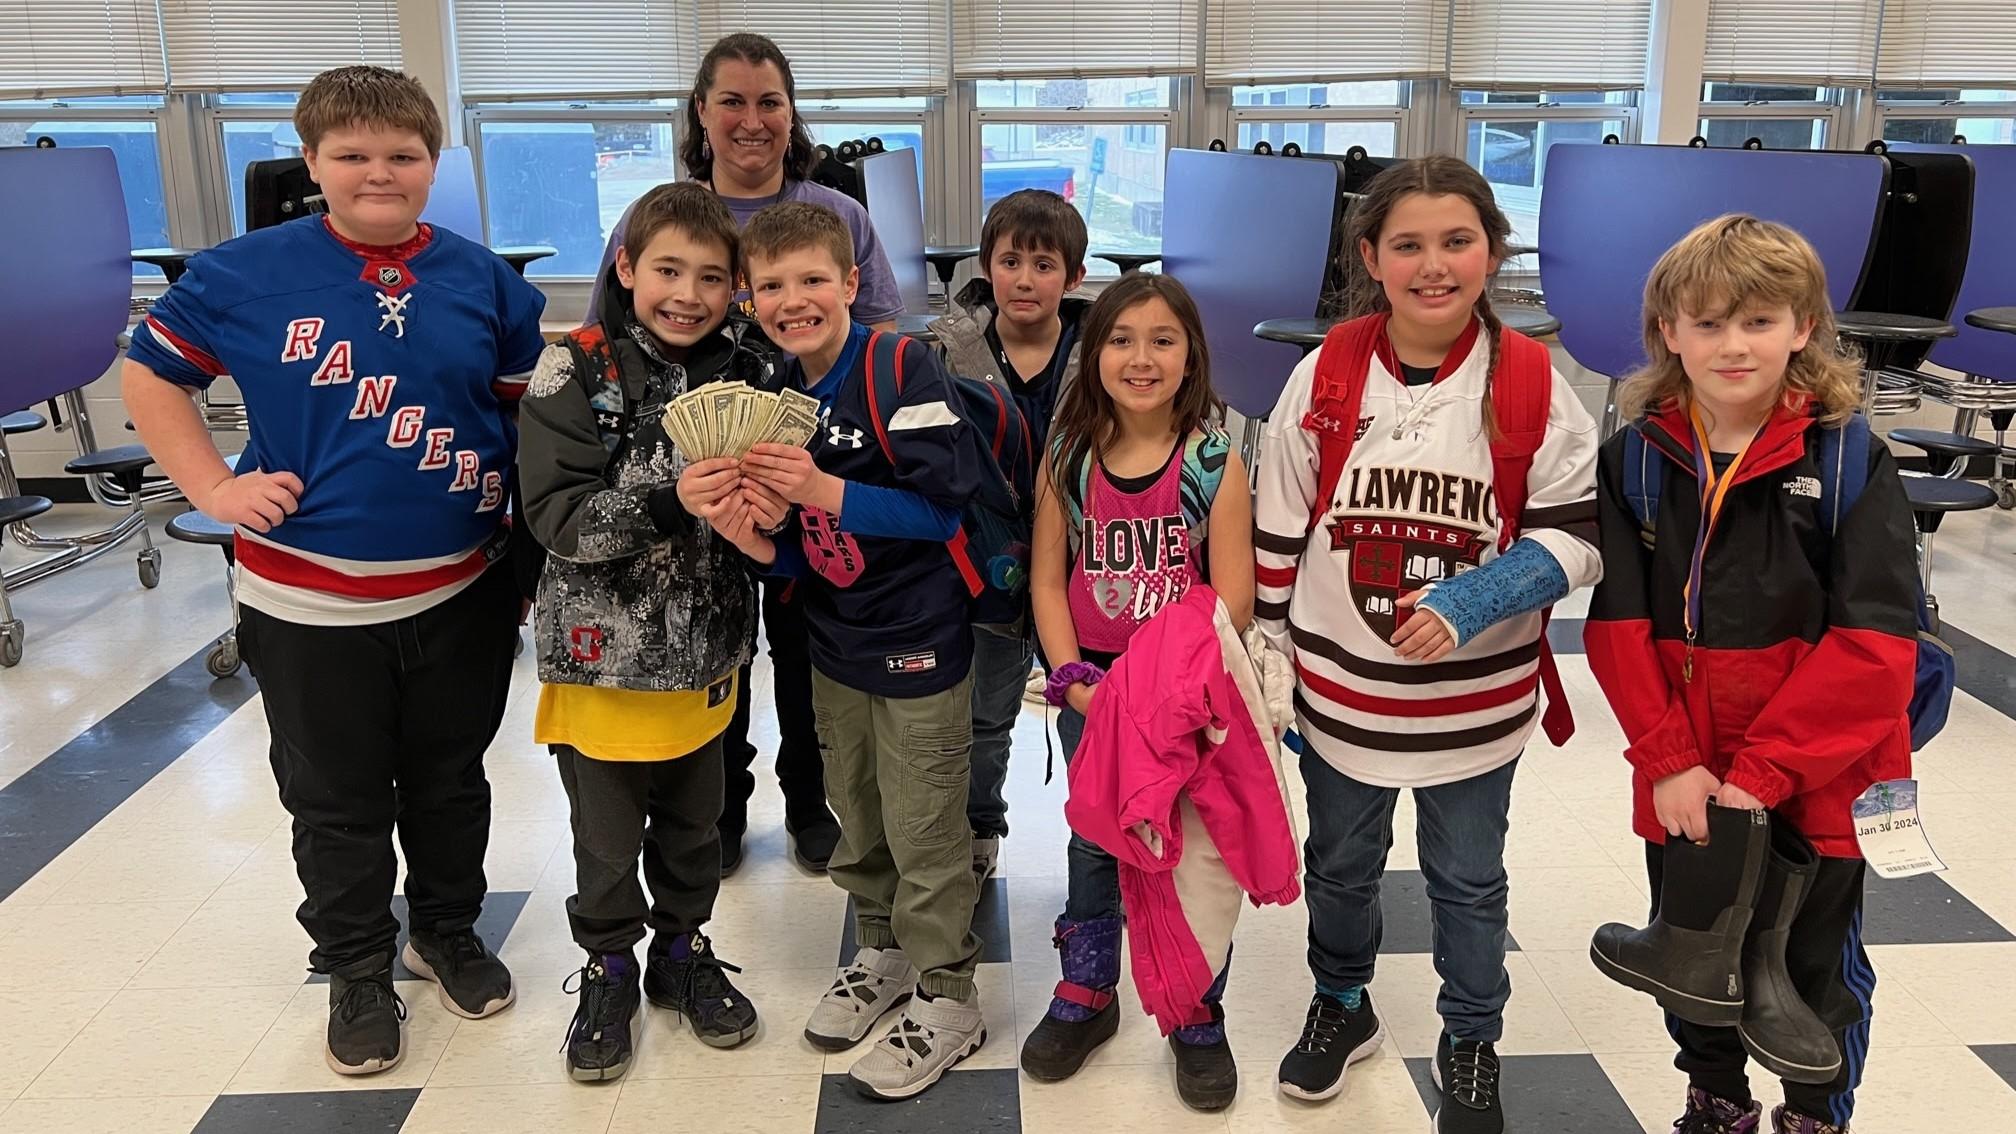 Club holds earnings raised by candy gram fundraiser